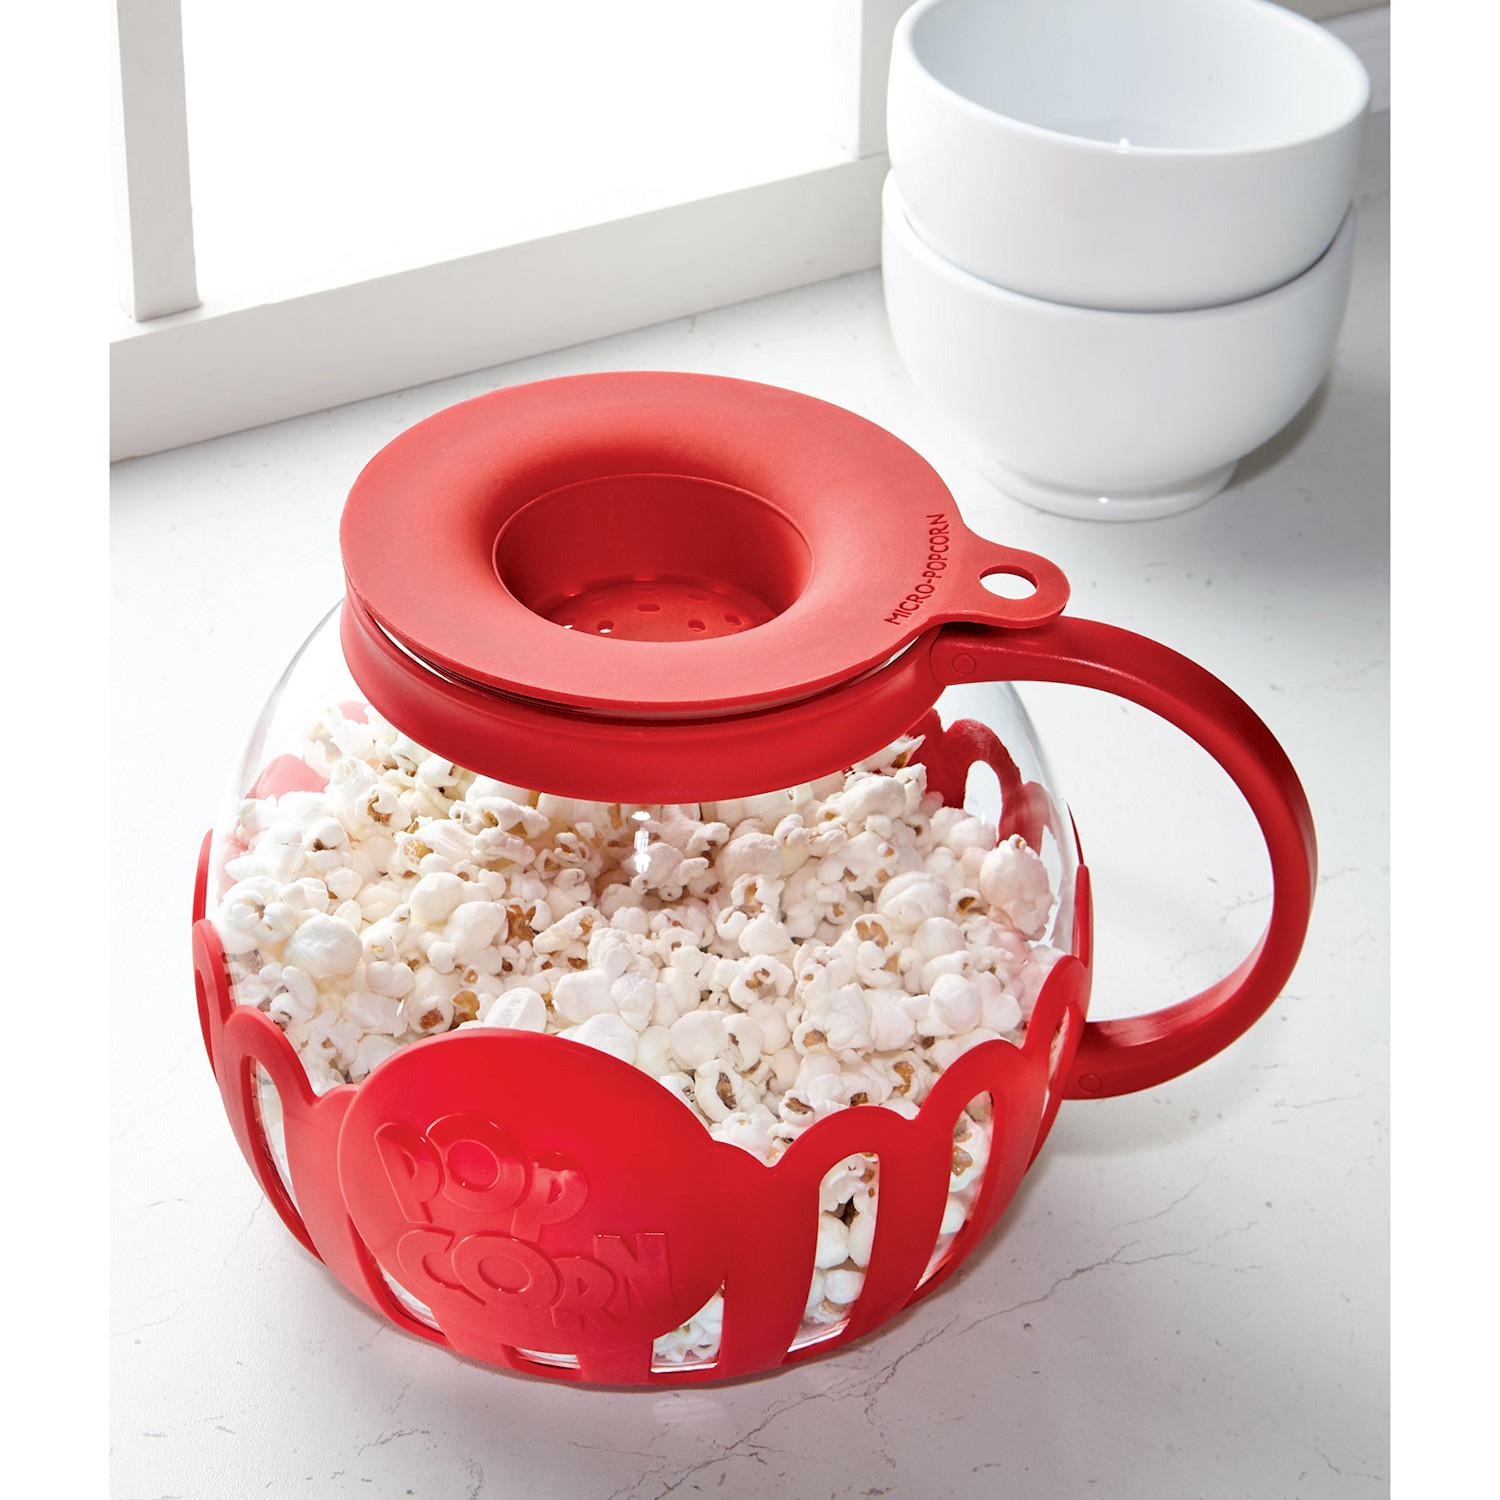 Micro-Pop Microwave Popcorn Maker - Food Safe Glass and Silicone Carafe